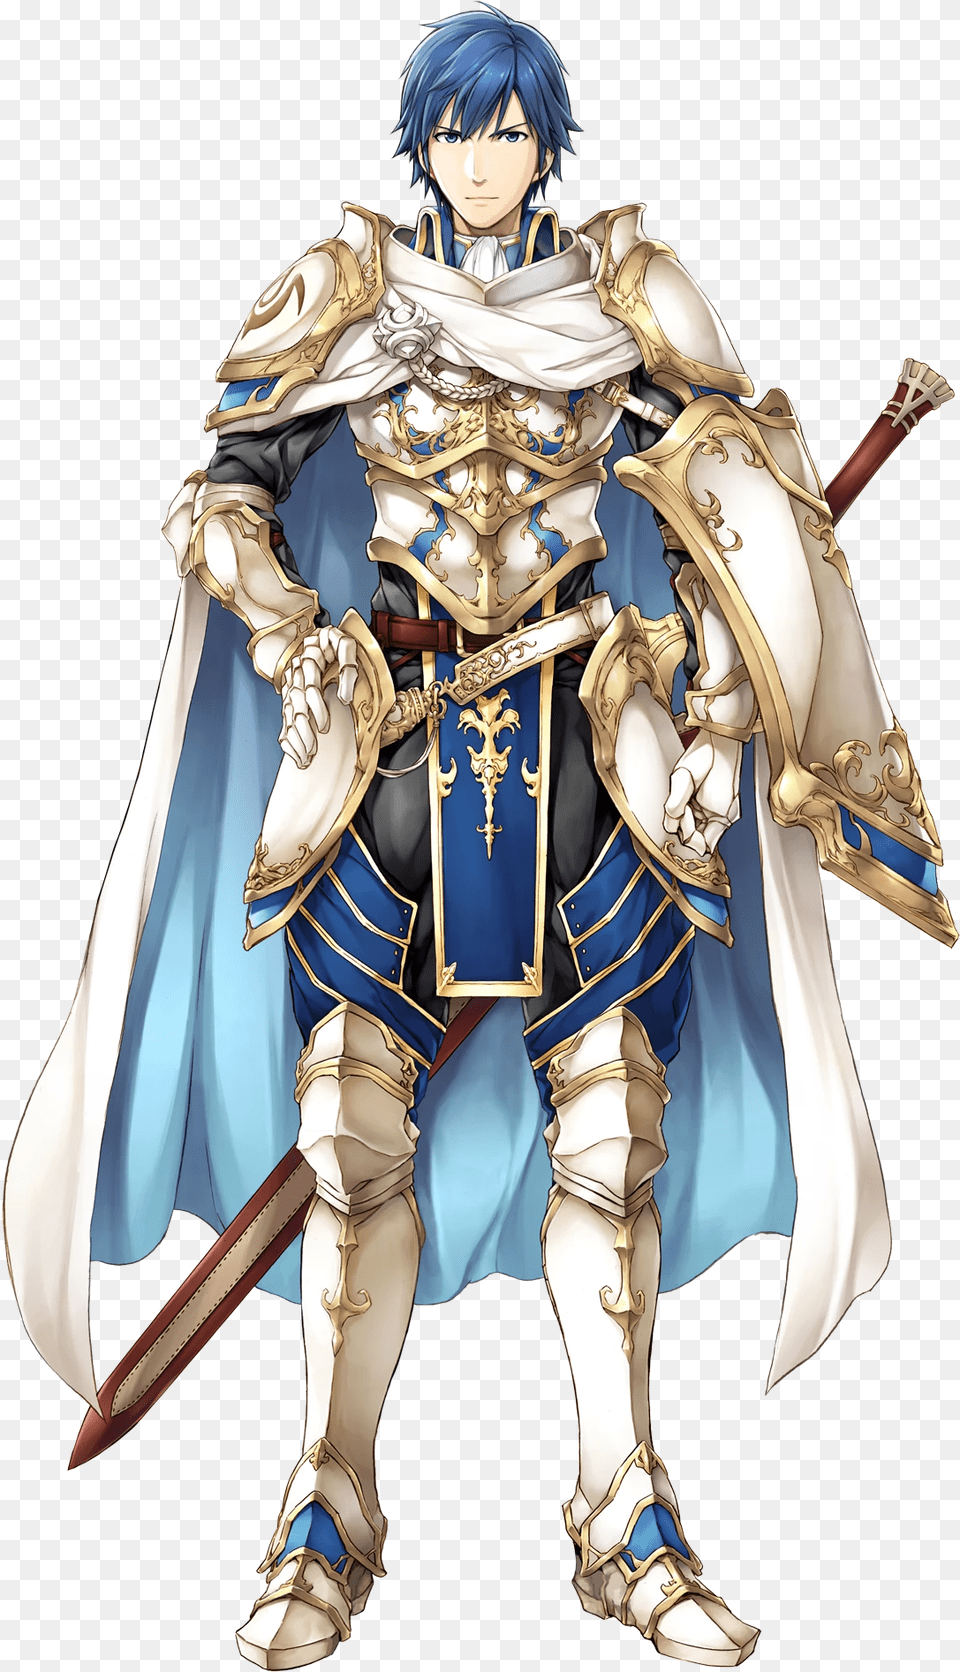 Exalted Chrom Fire Emblem Heroes Wiki Gamepress Fire Emblem Heroes Chrom, Book, Publication, Comics, Adult Png